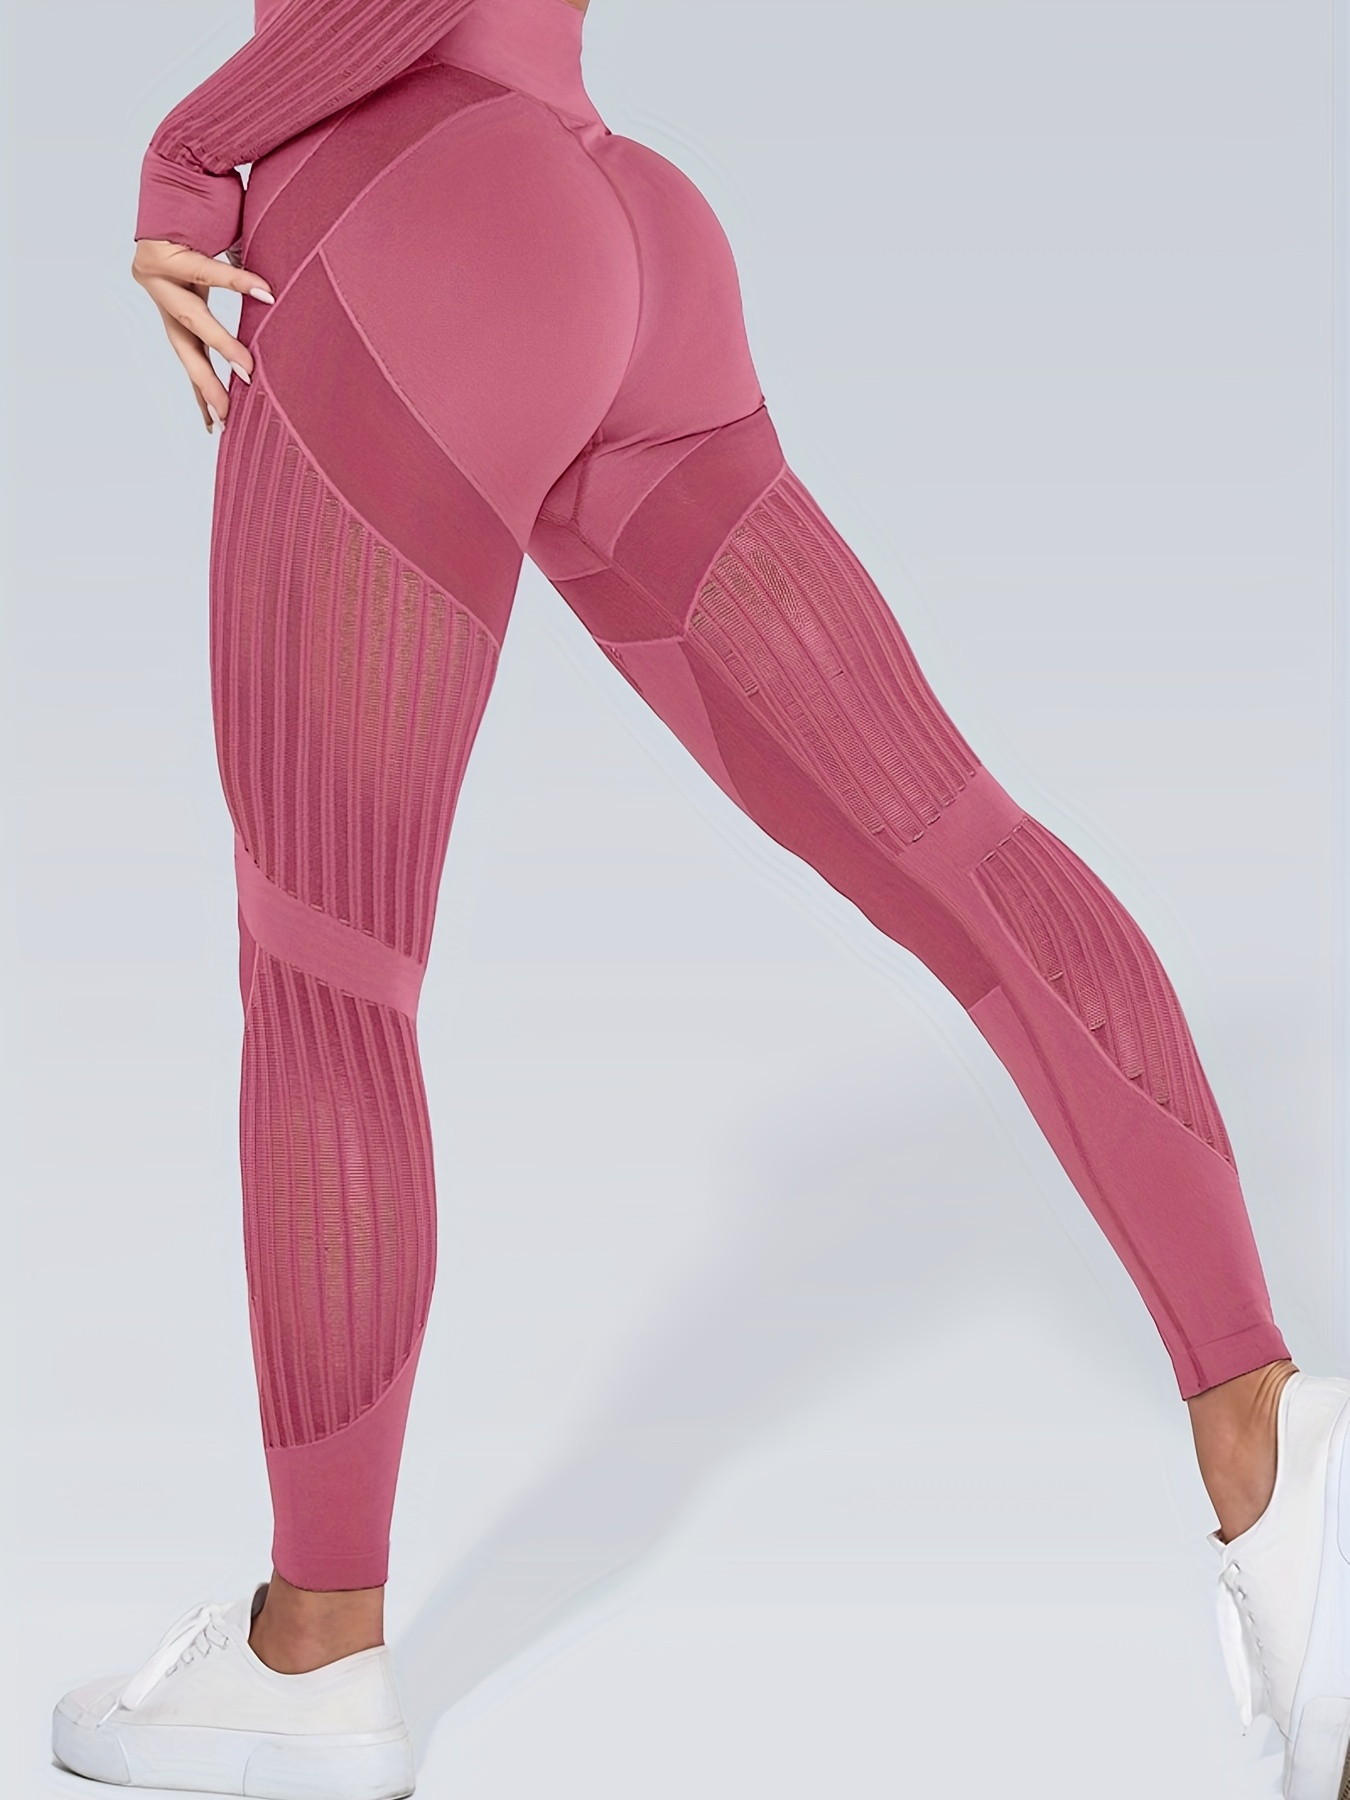 Fit Seamless Contrast Workout Leggings